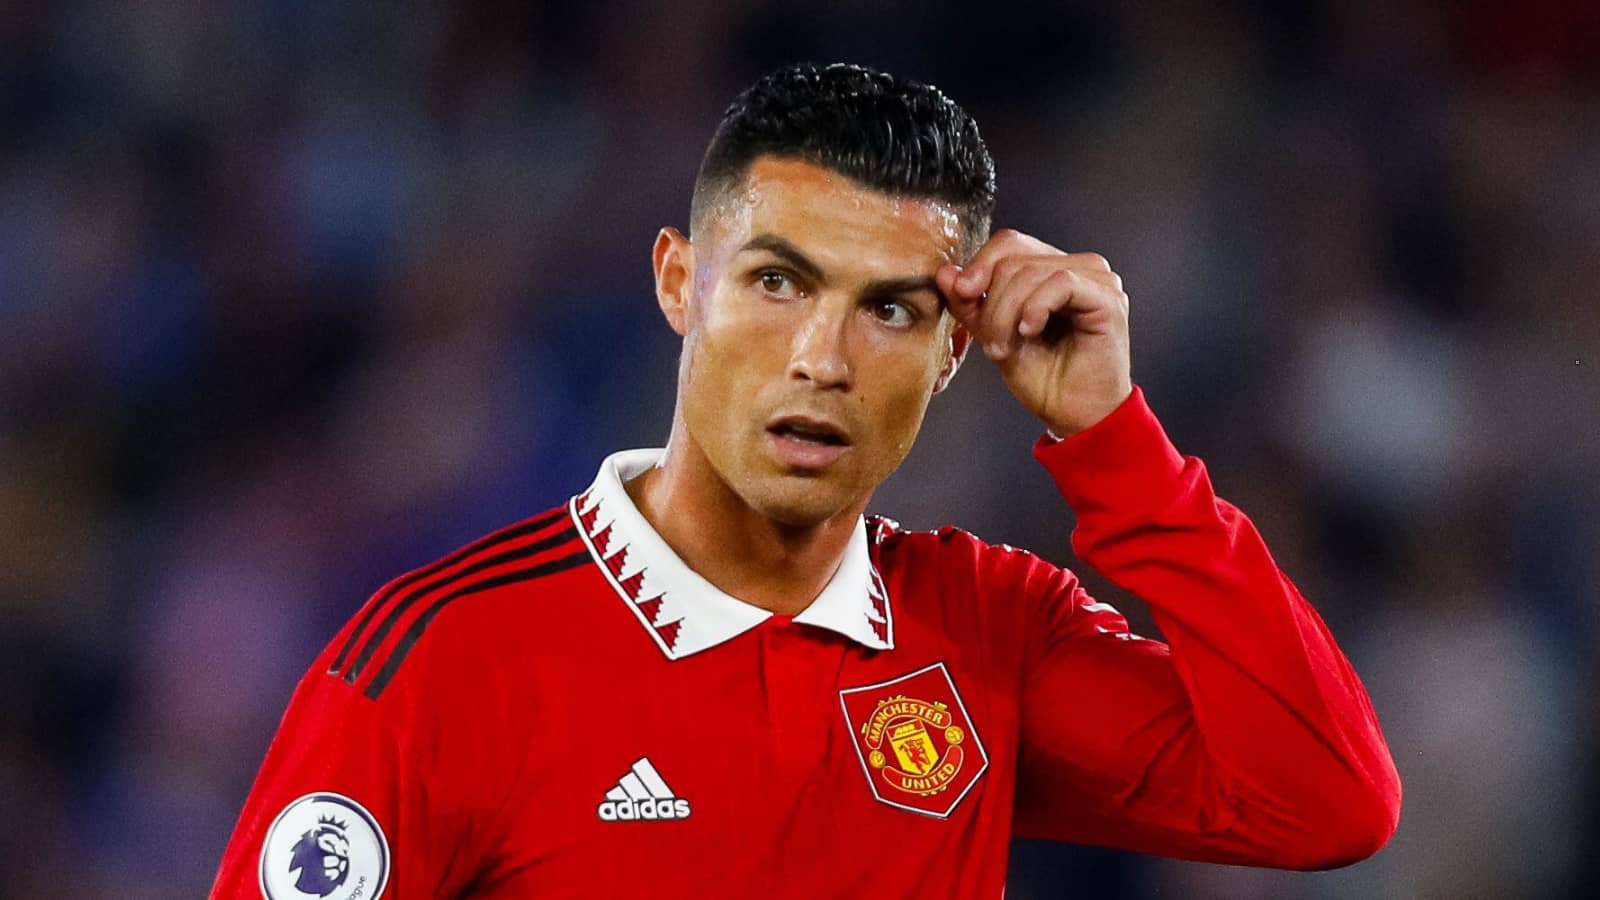 BREAKING: Ronaldo Leaves Manchester United With Immediate Effect